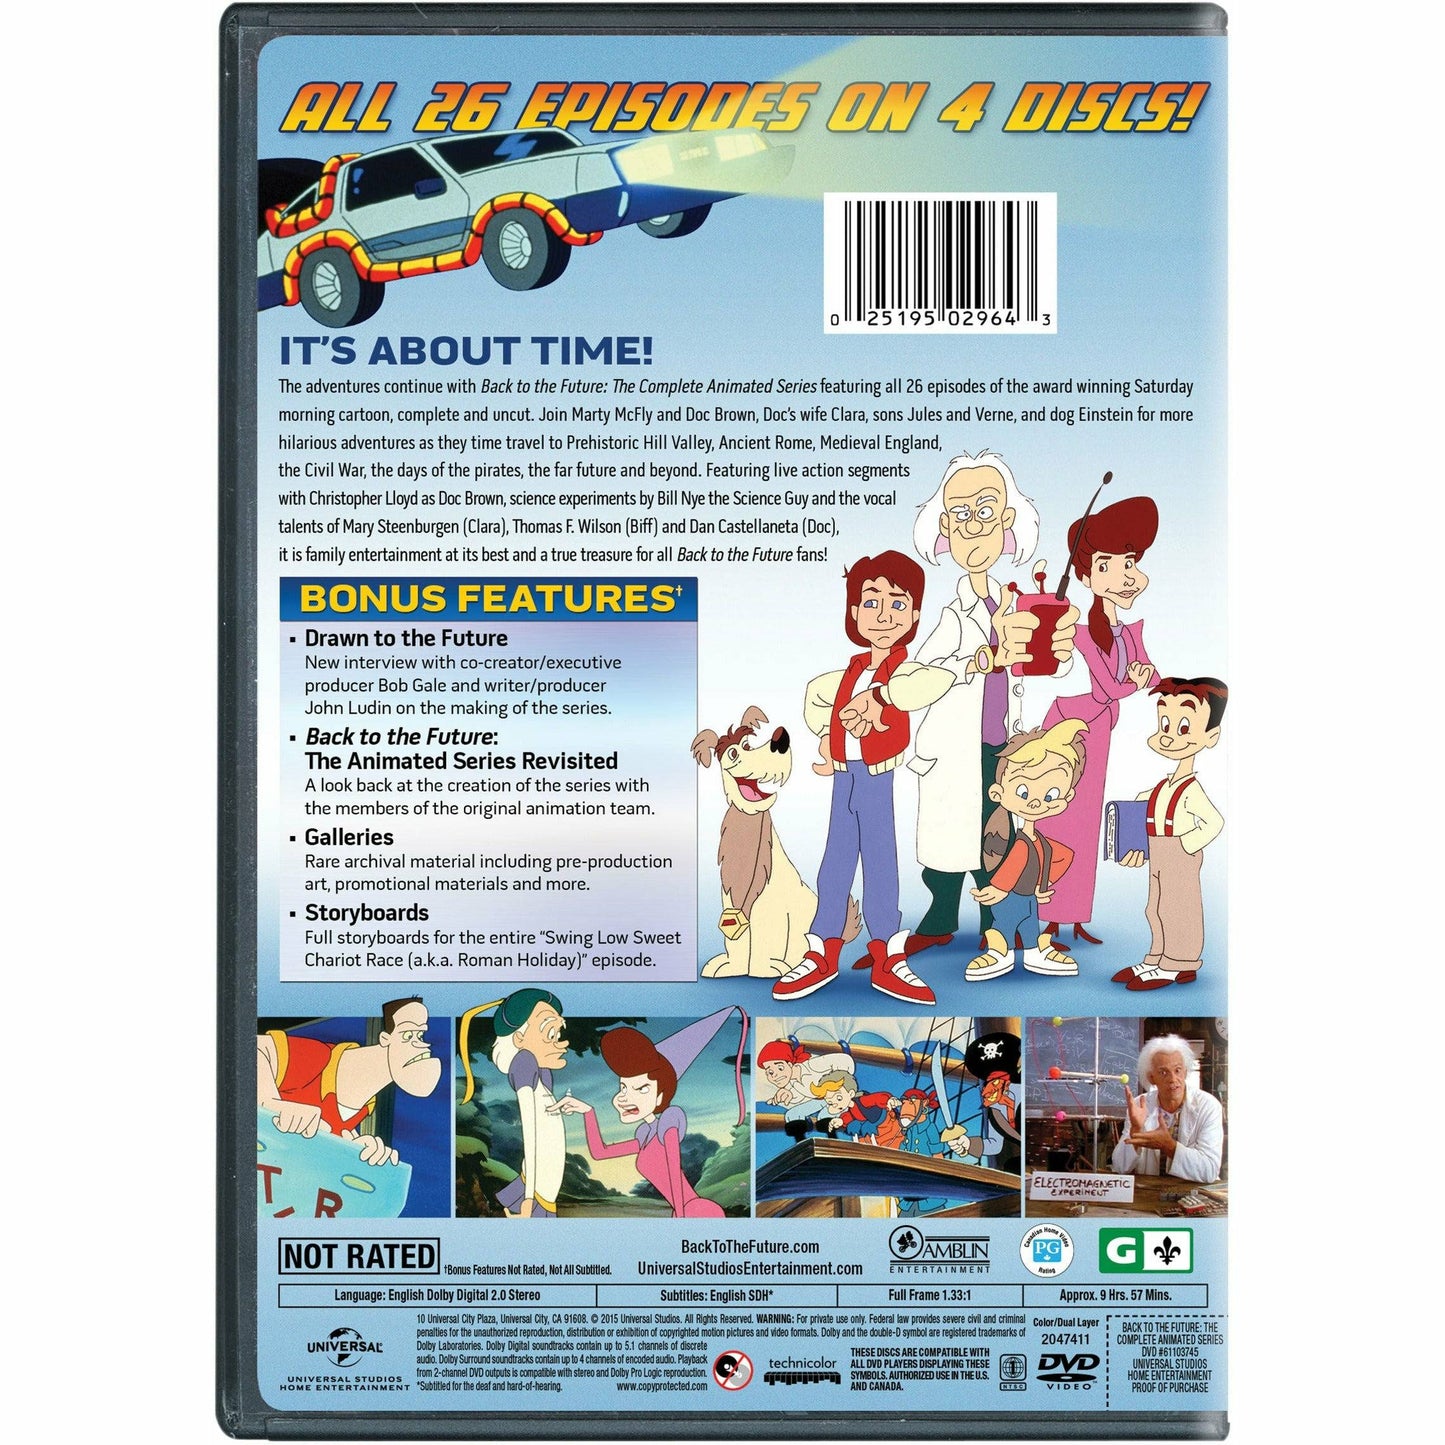 Back to the Future: The Complete Animated Series (DVD)